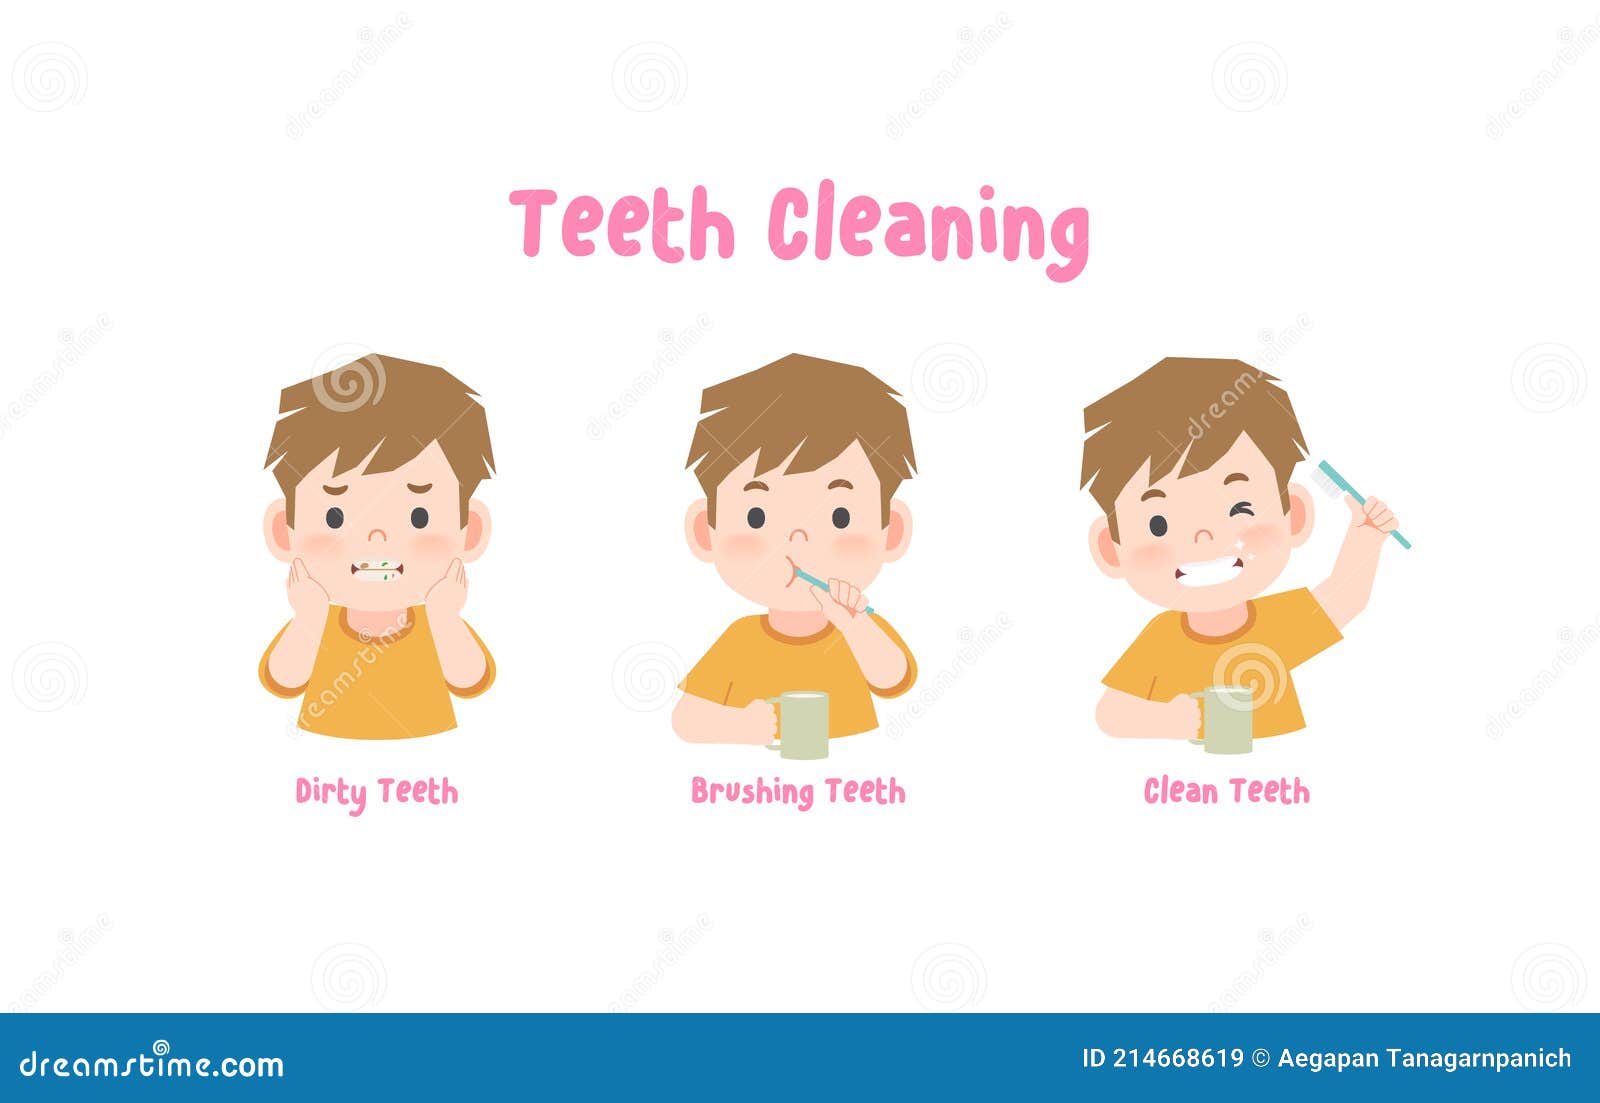 3-steps-a-boy-cleaning-his-teeth-with-toothbrush-by-brushing-teeth-illustration-vector-on-white